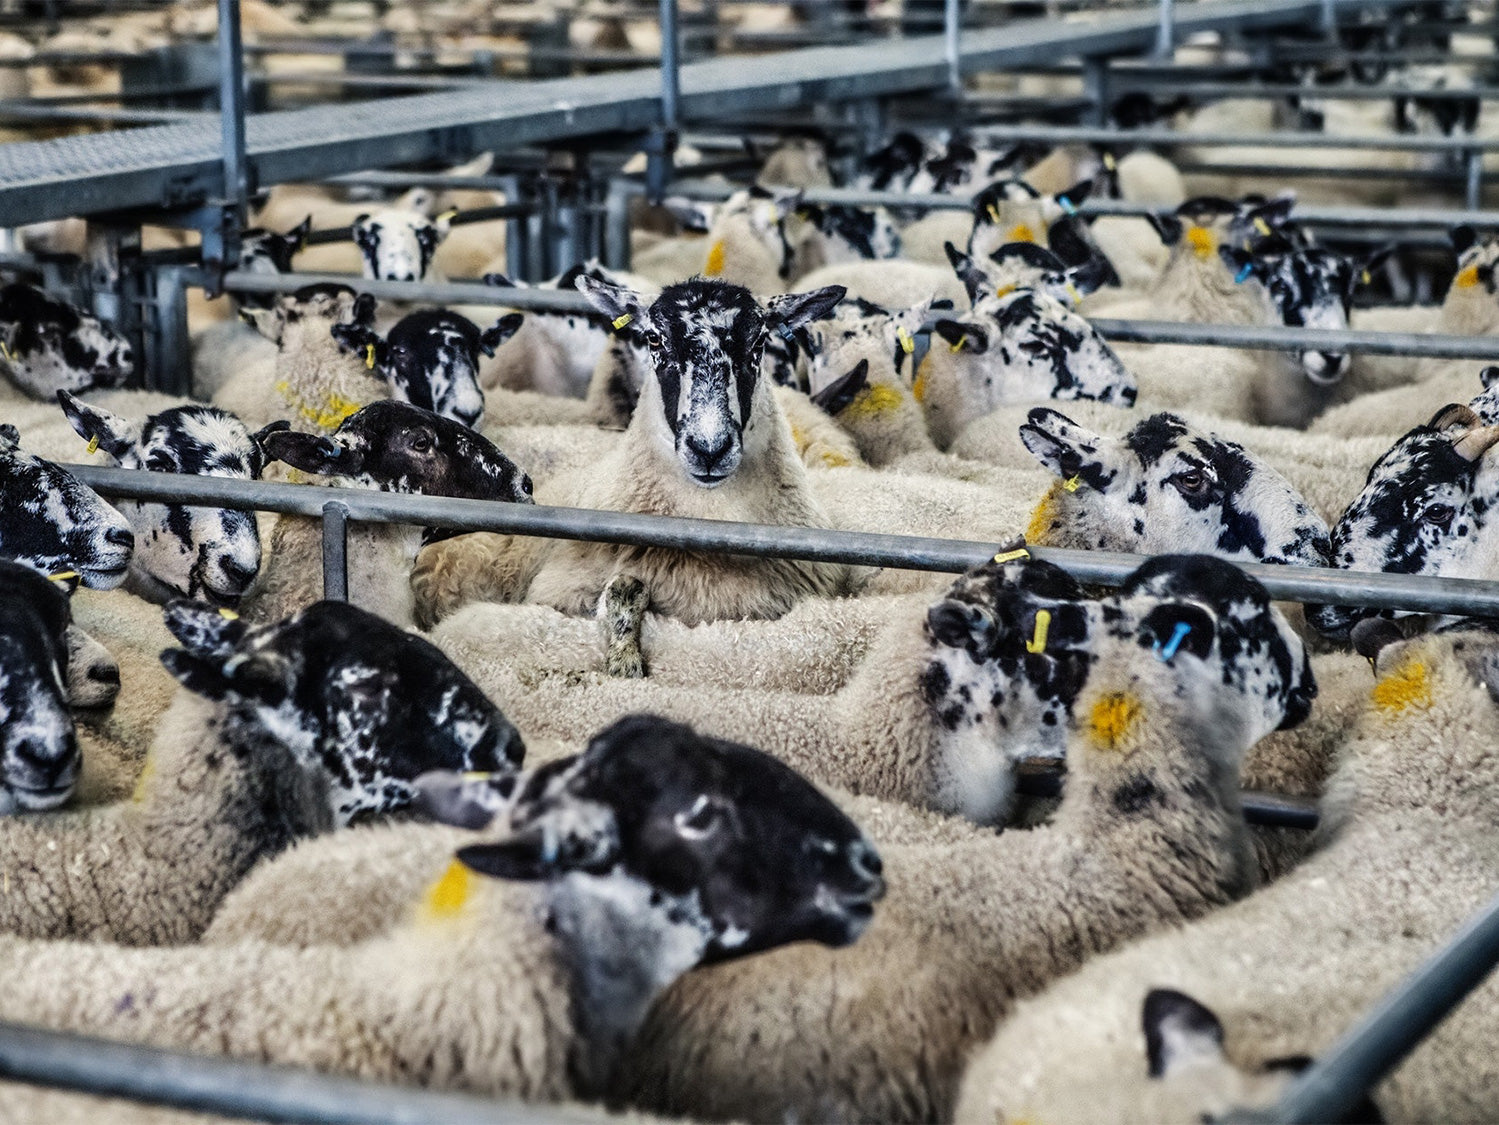 Are you ready for the new abattoir CCTV regulations?